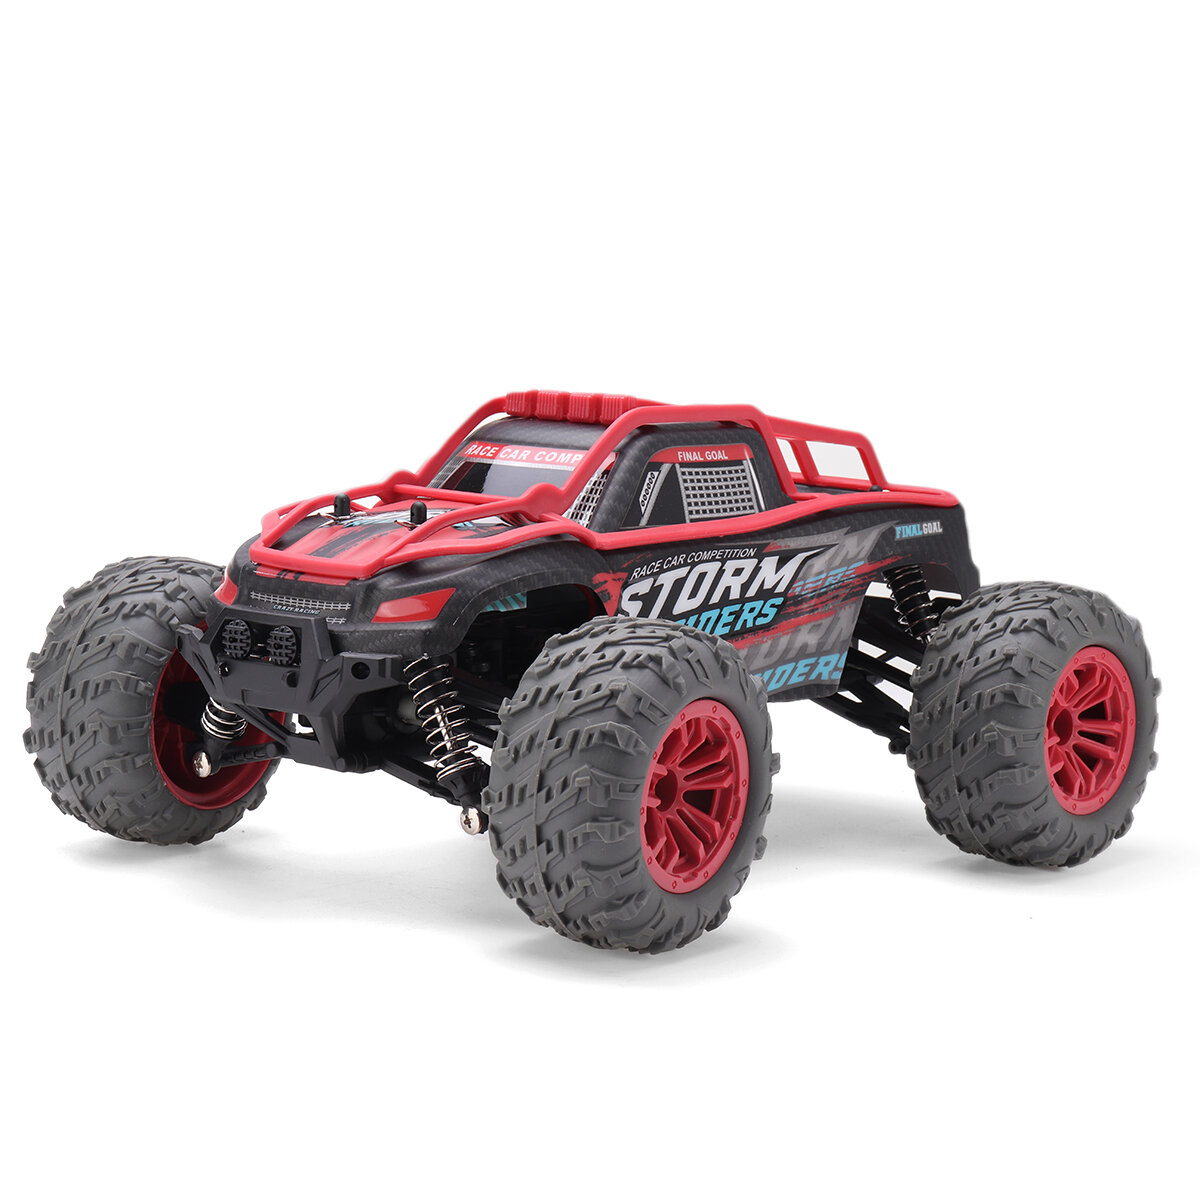 UJ99 1/14 2.4G 4WD Off Road RC Car Vehicle Models High Speed Full Proportional Control 36km/h RTR